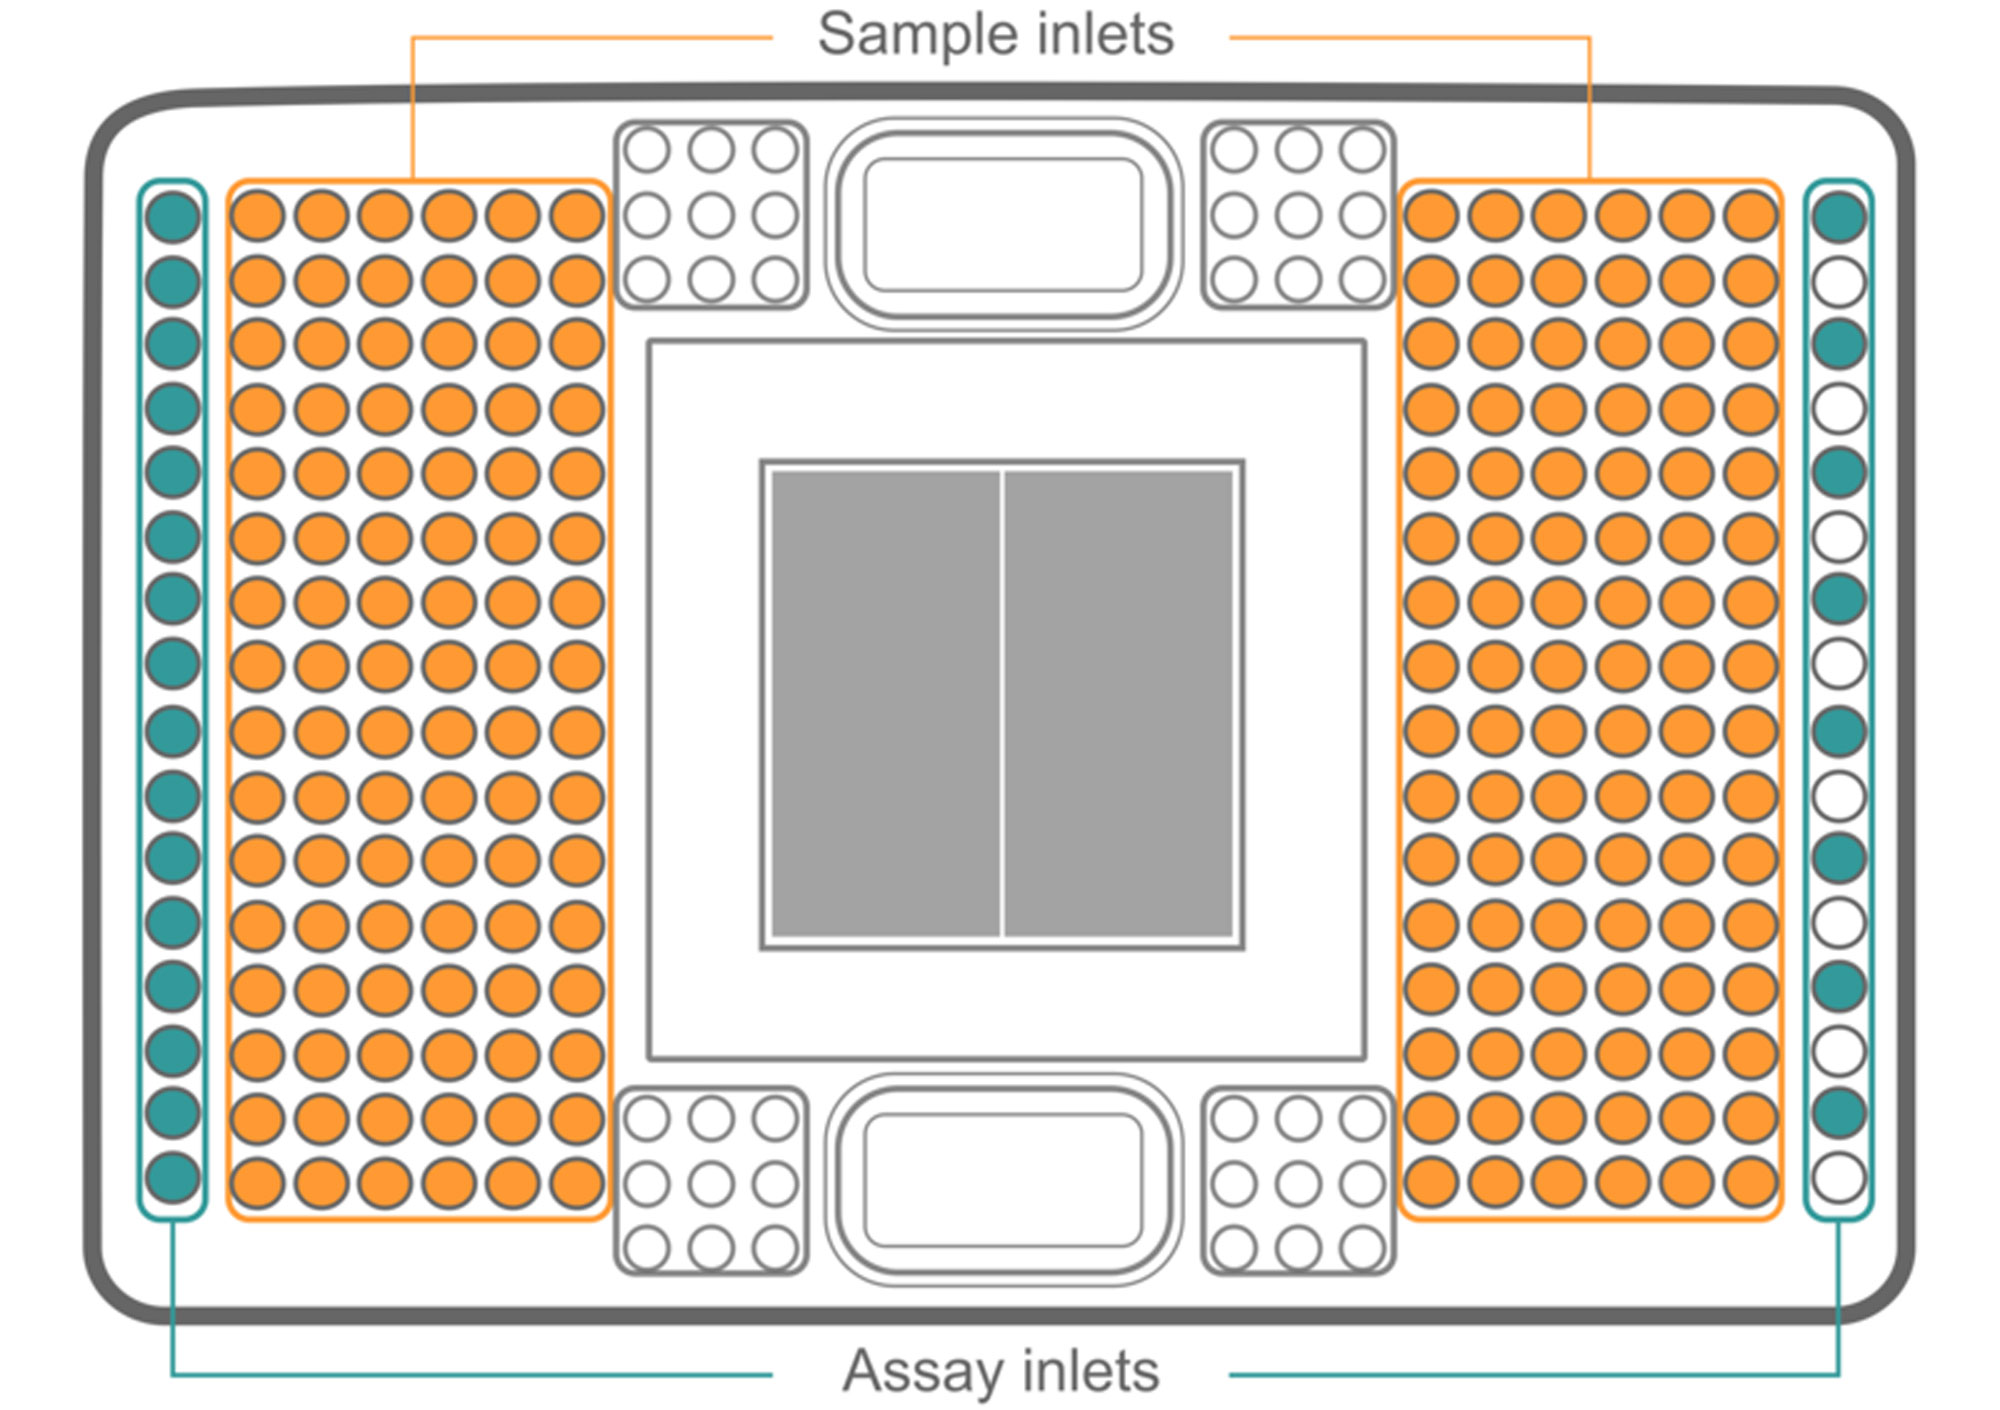 Graphical representation of Fluidigm 192.24 Dynamic Array IFC with the sample and assay inlets.